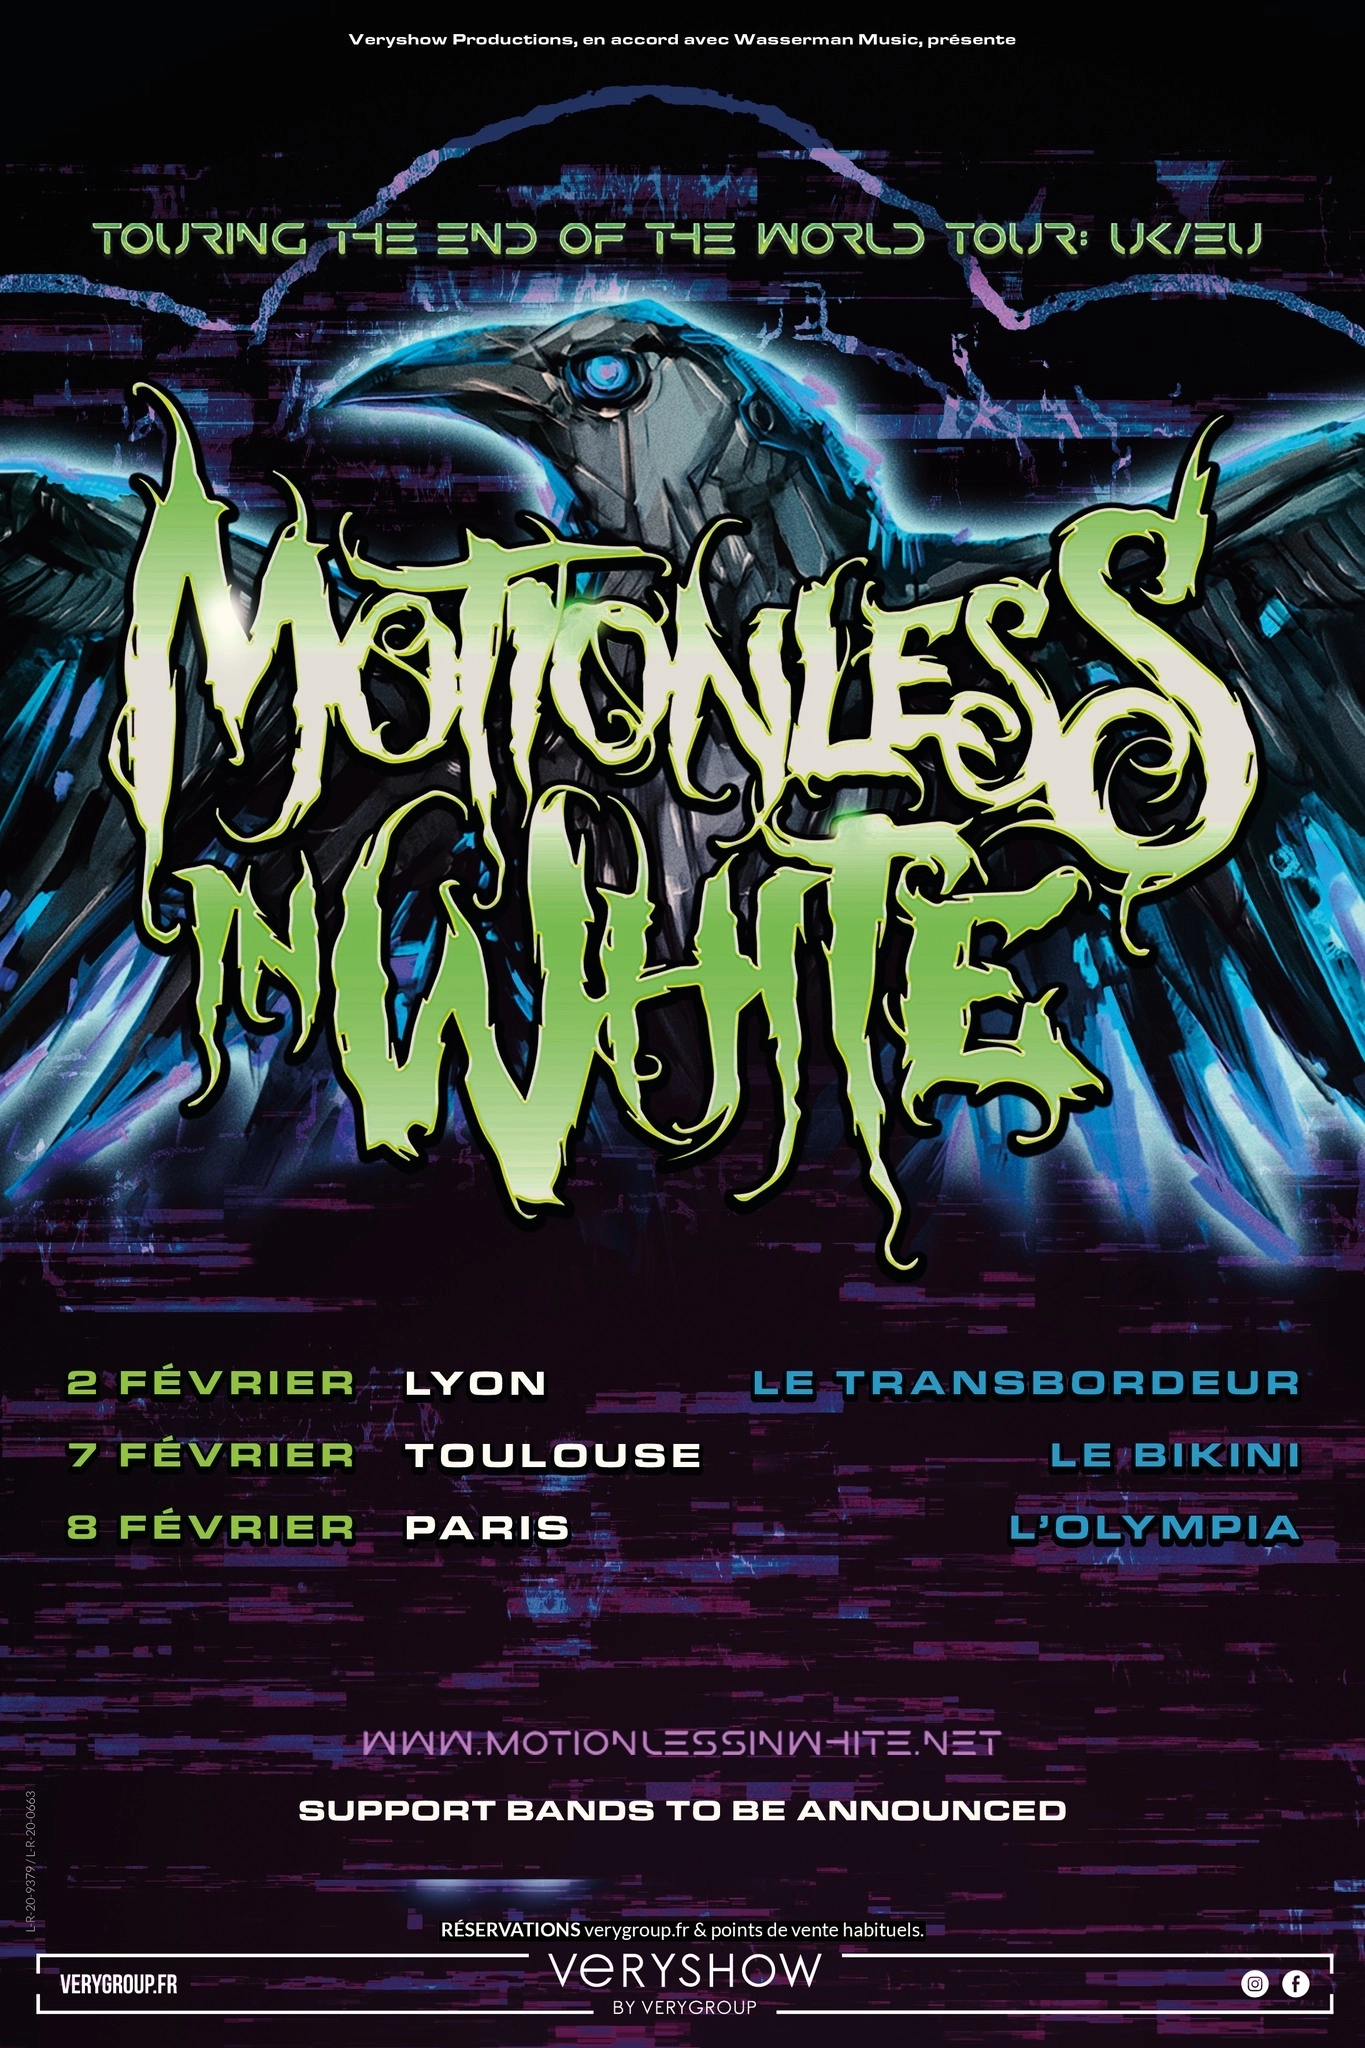 Motionless In White at Le Bikini Tickets